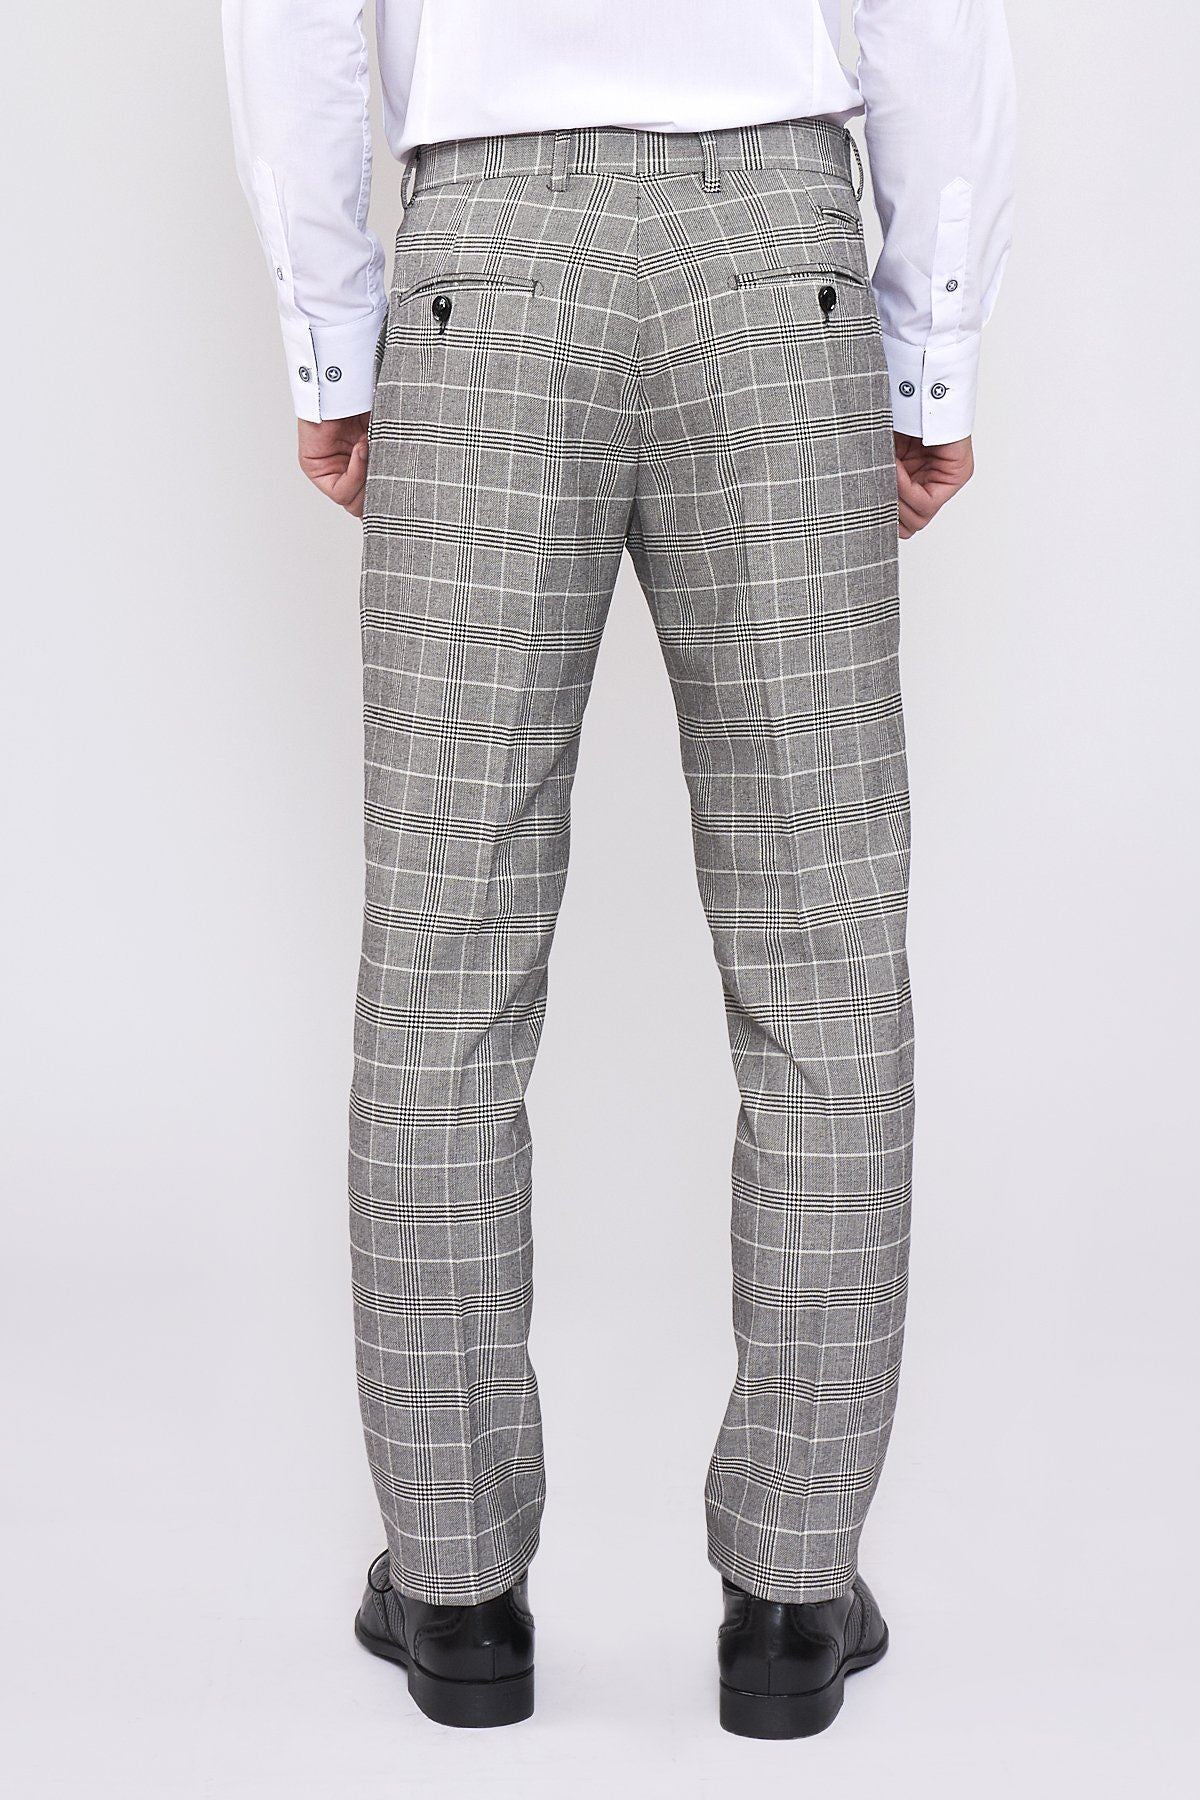 Marc Darcy- Ross Grey Check Trouser